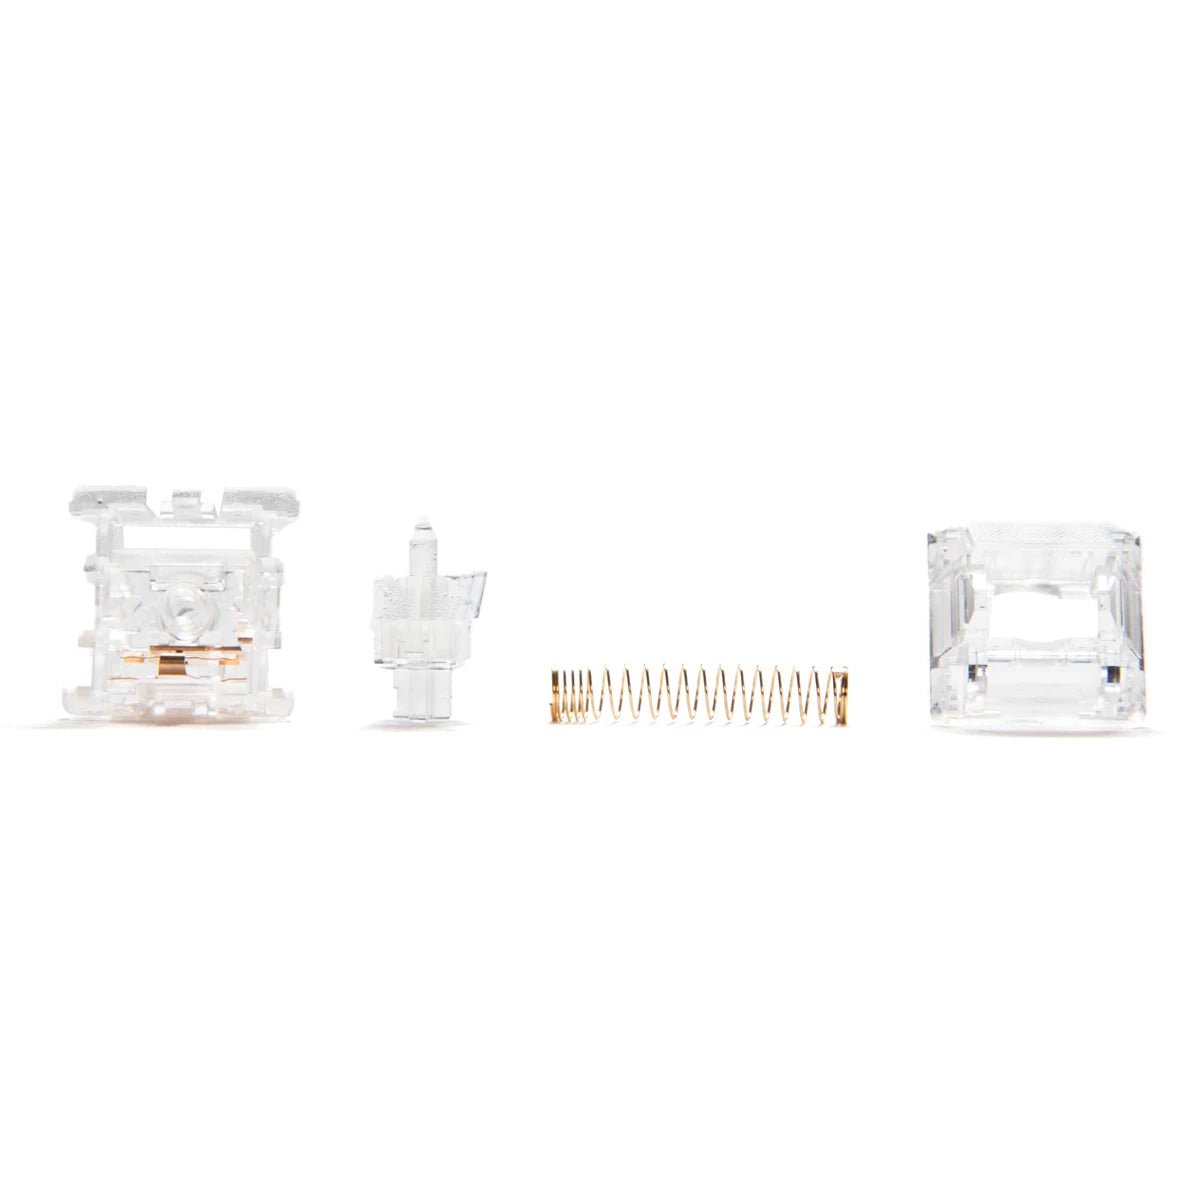 Durock Ice King Tactile Switches